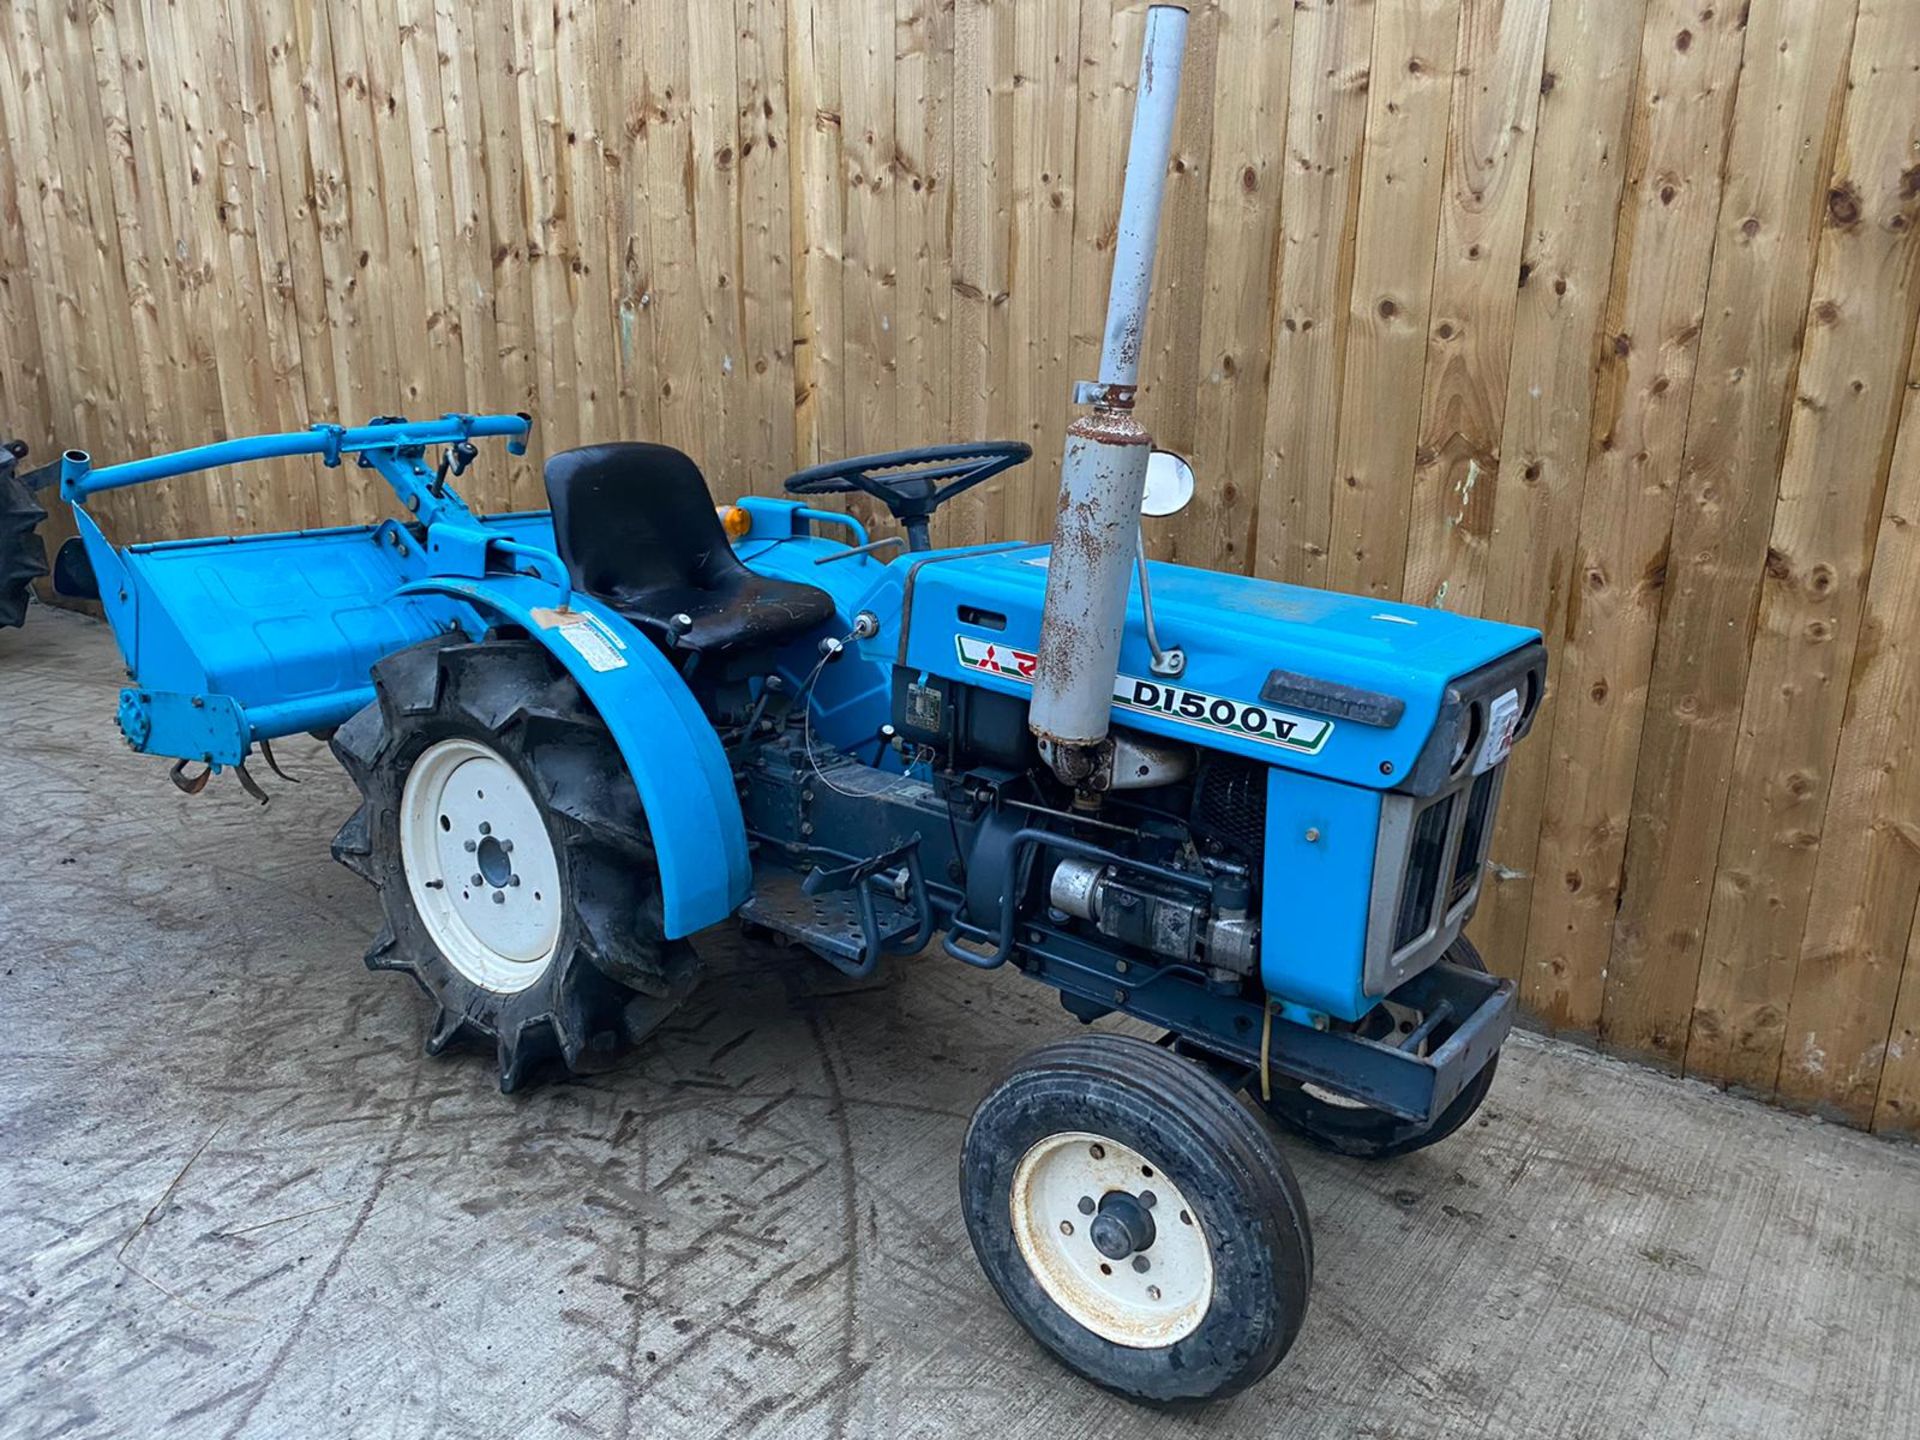 MITSUBISHI D1500V COMPACT TRACTOR & ROTAVATOR, STARTS FIRST TIME RUNS AND DRIVES WELL *PLUS VAT*